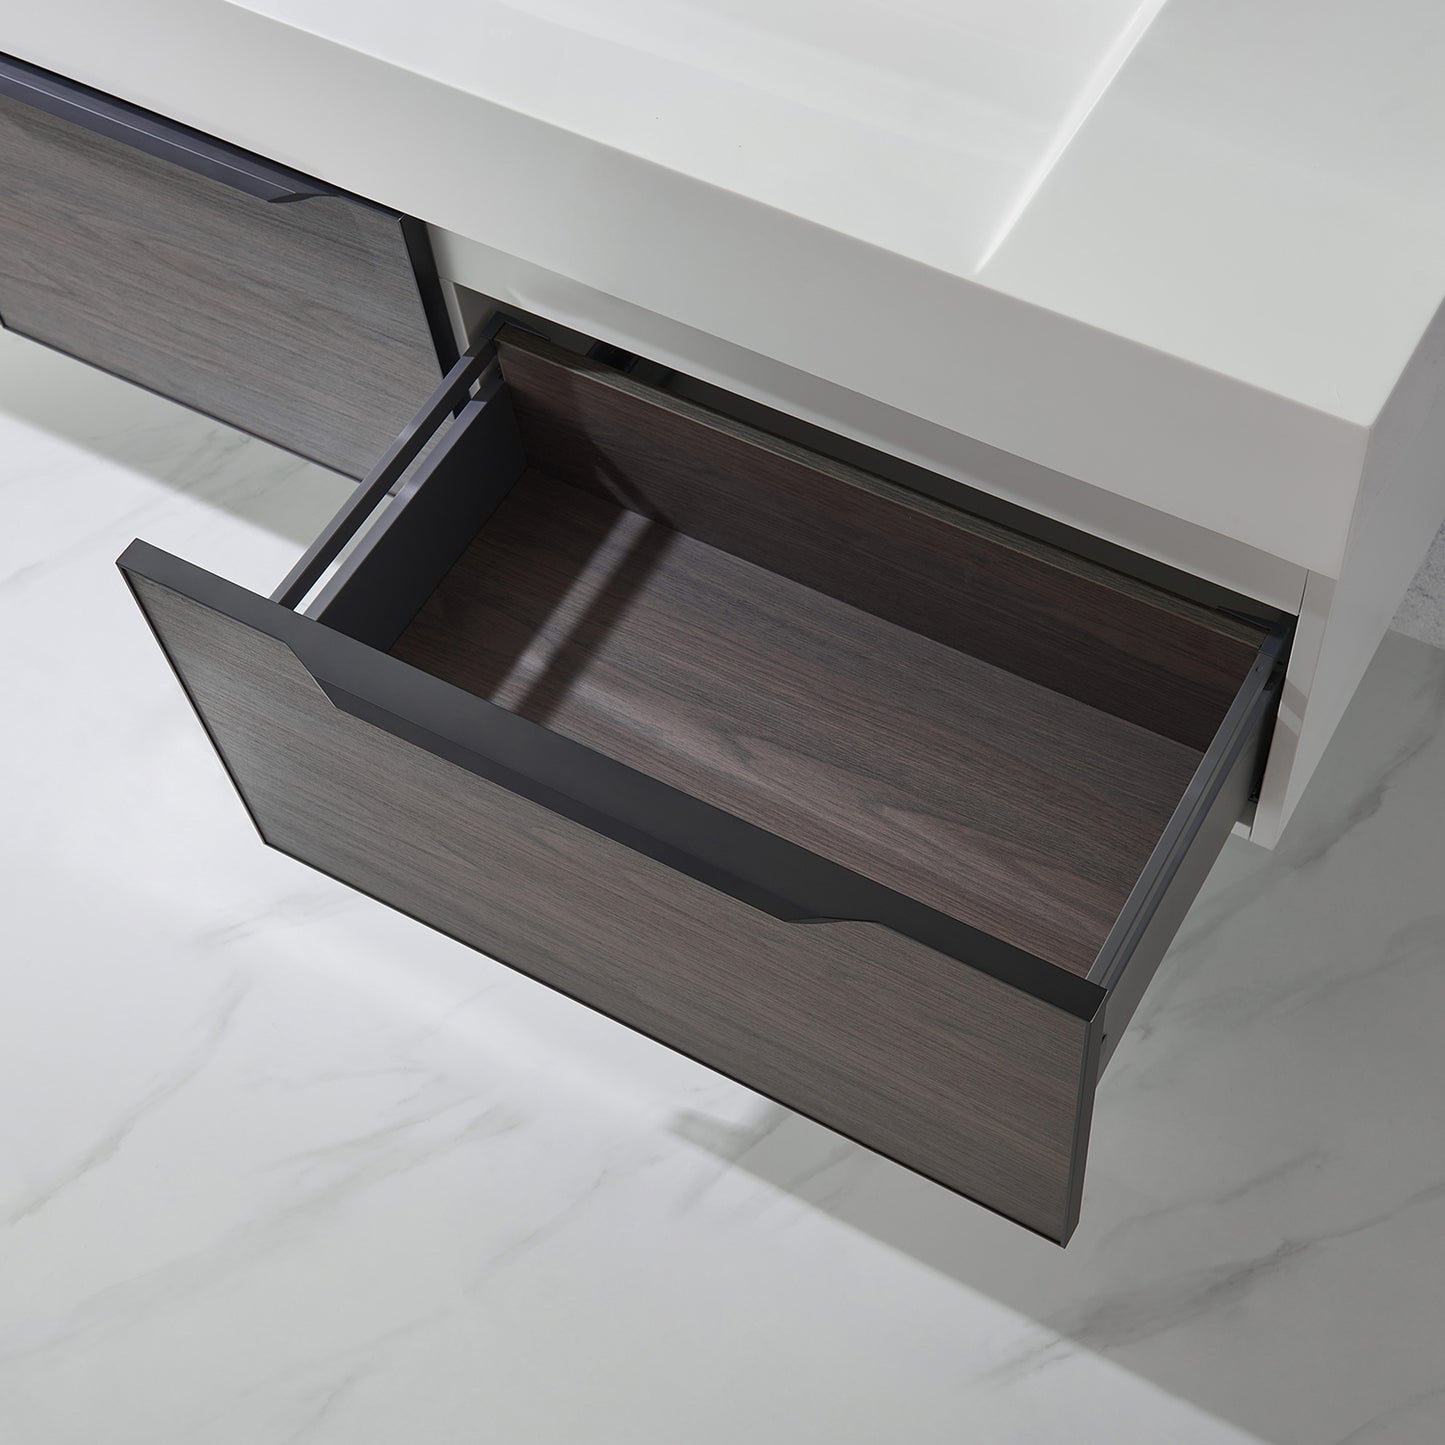 Vegadeo 72" Double Sink Bath Vanity in Suleiman Oak with White One-Piece Composite Stone Sink Top